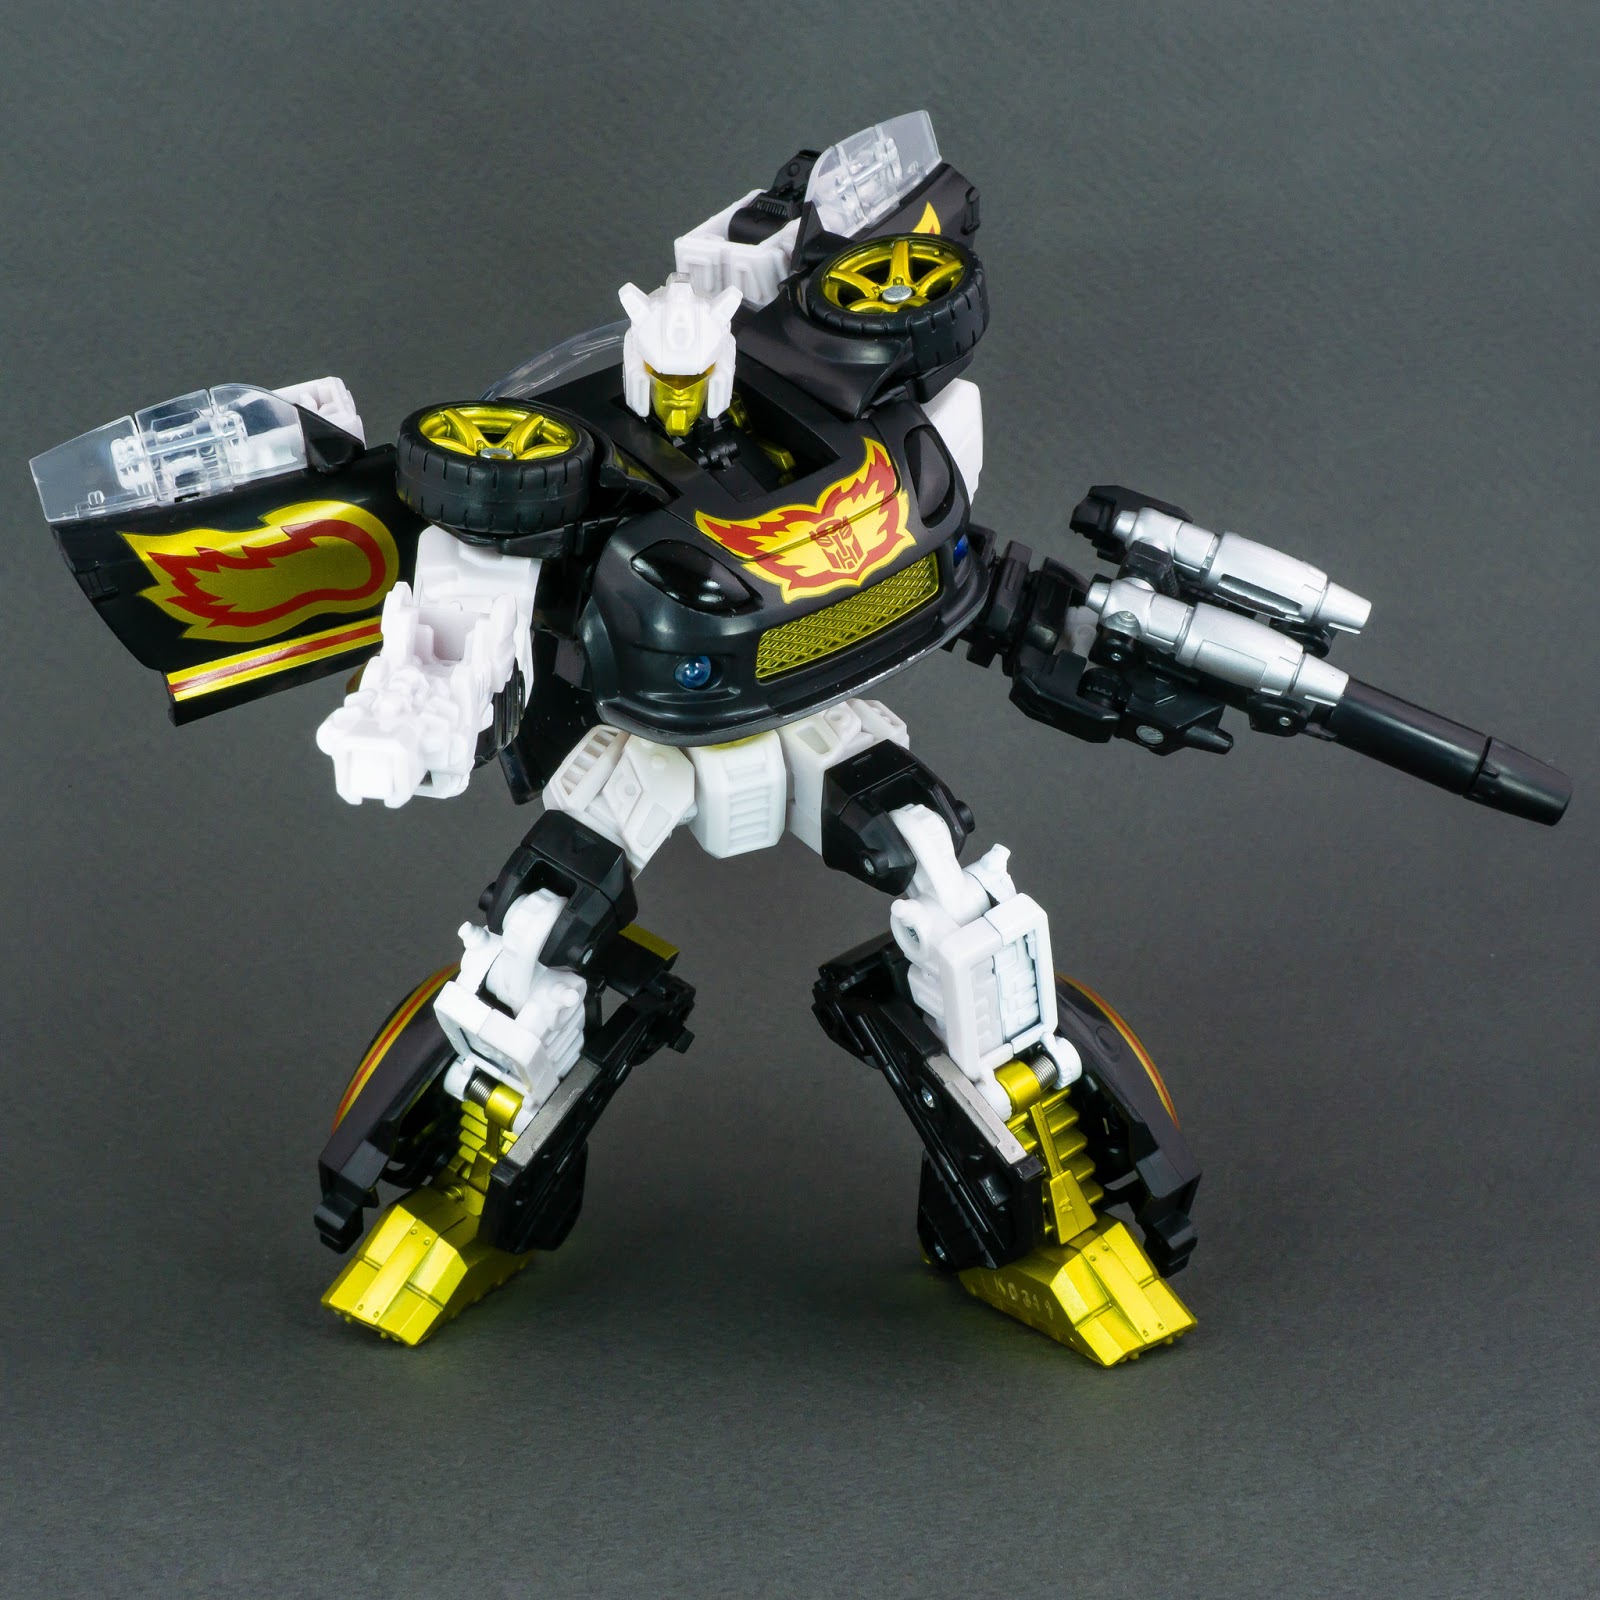 Transformers United Stepper robot mode posed